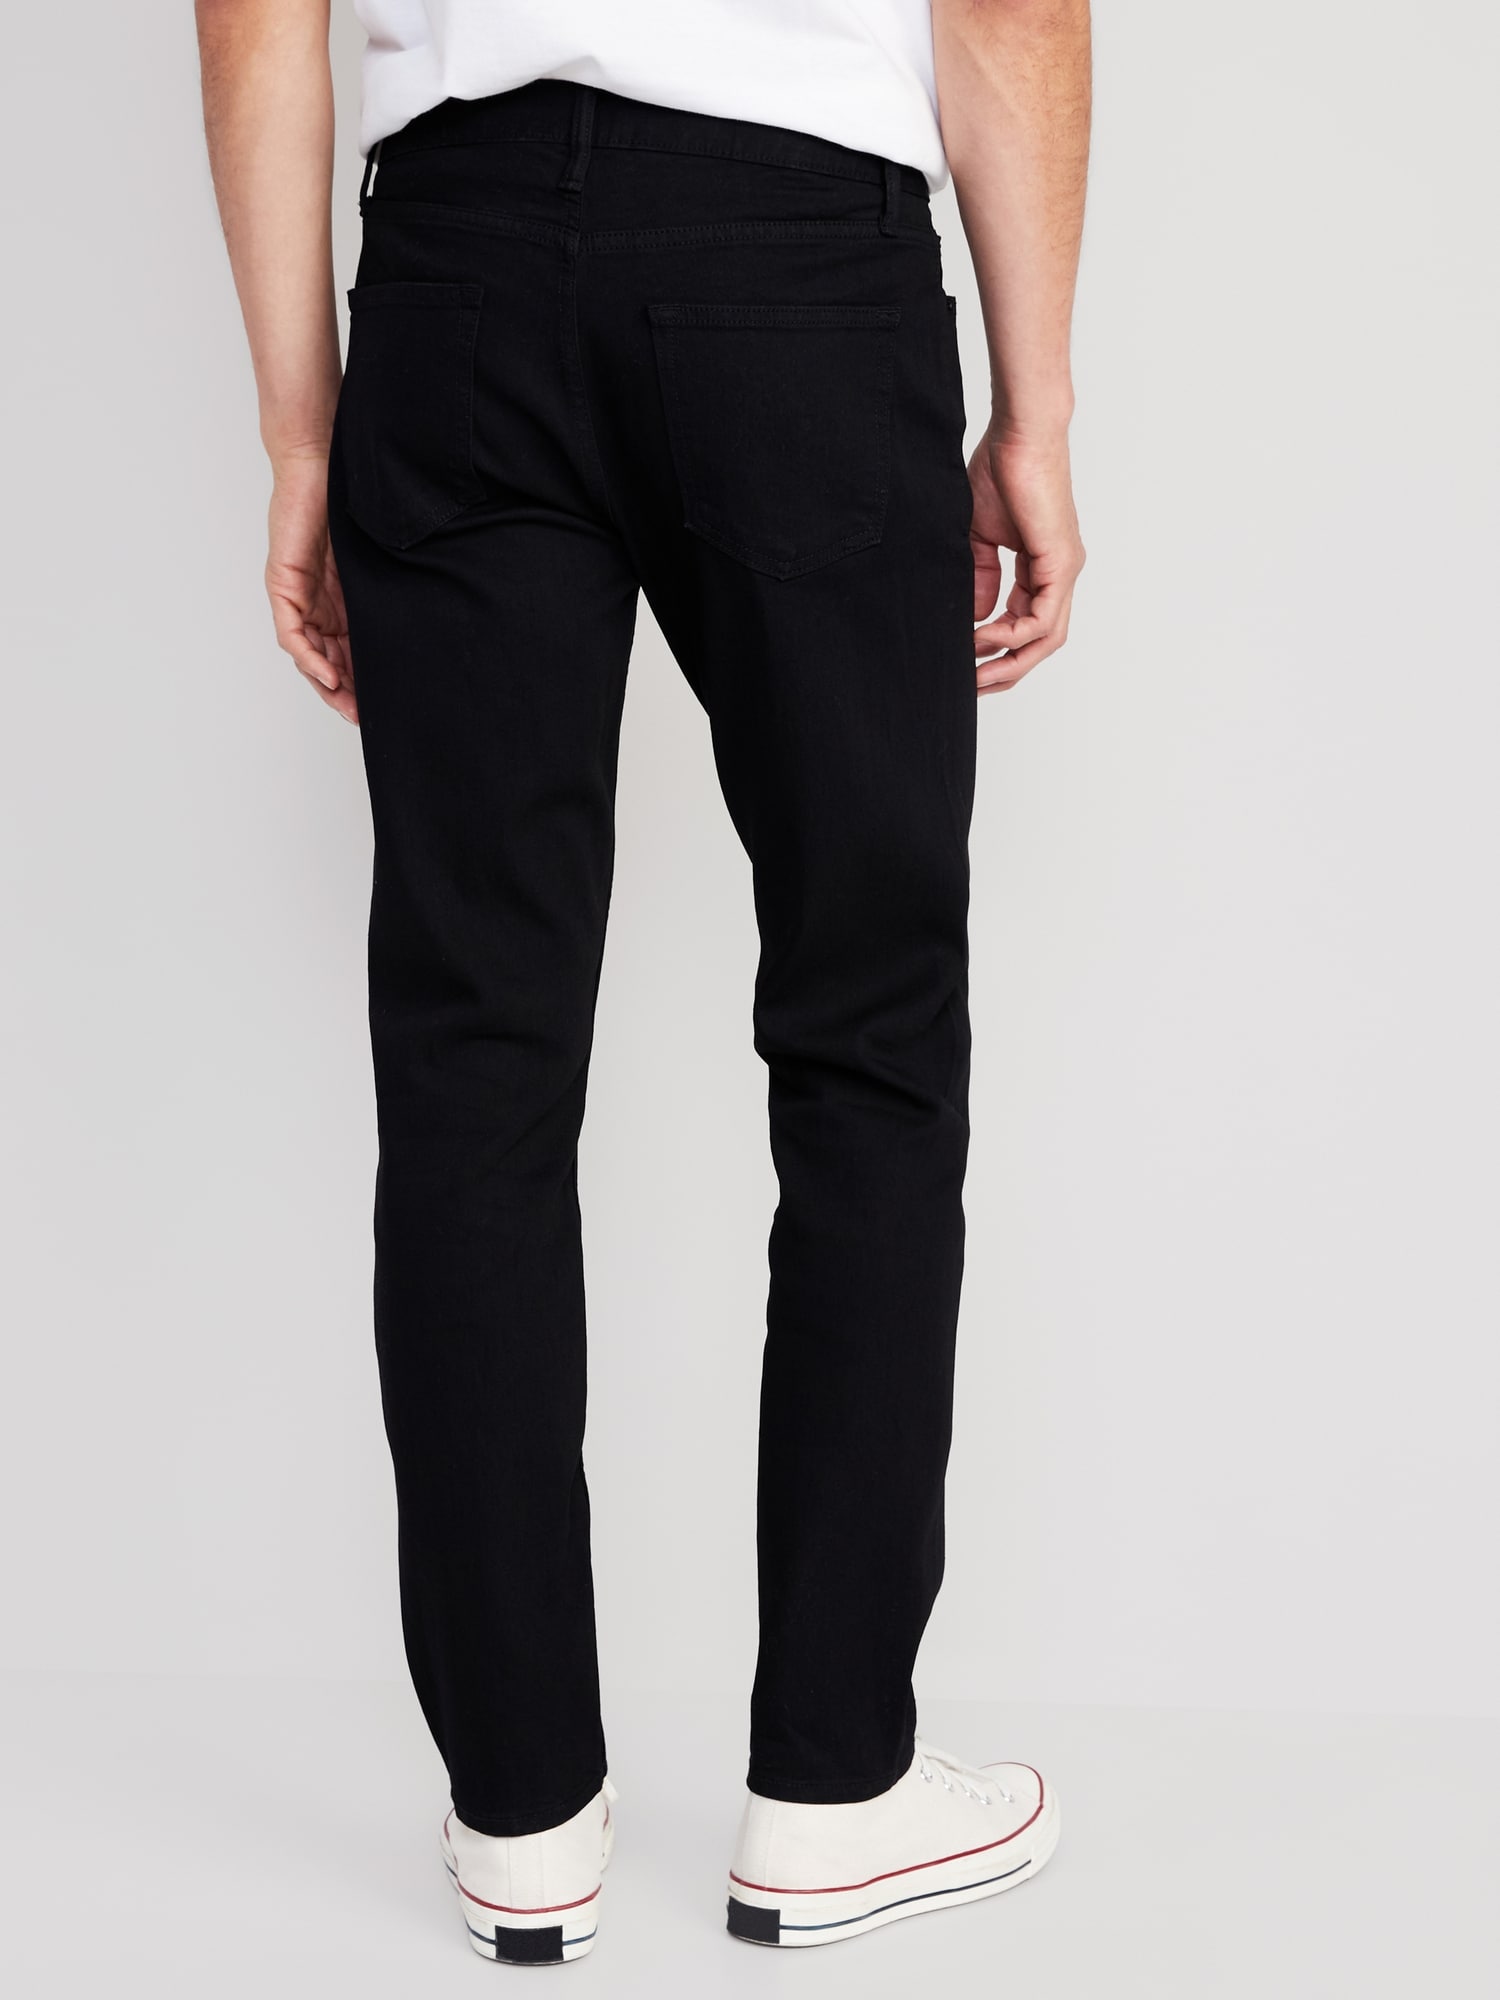 Tapered Jeans - Mens Jeans